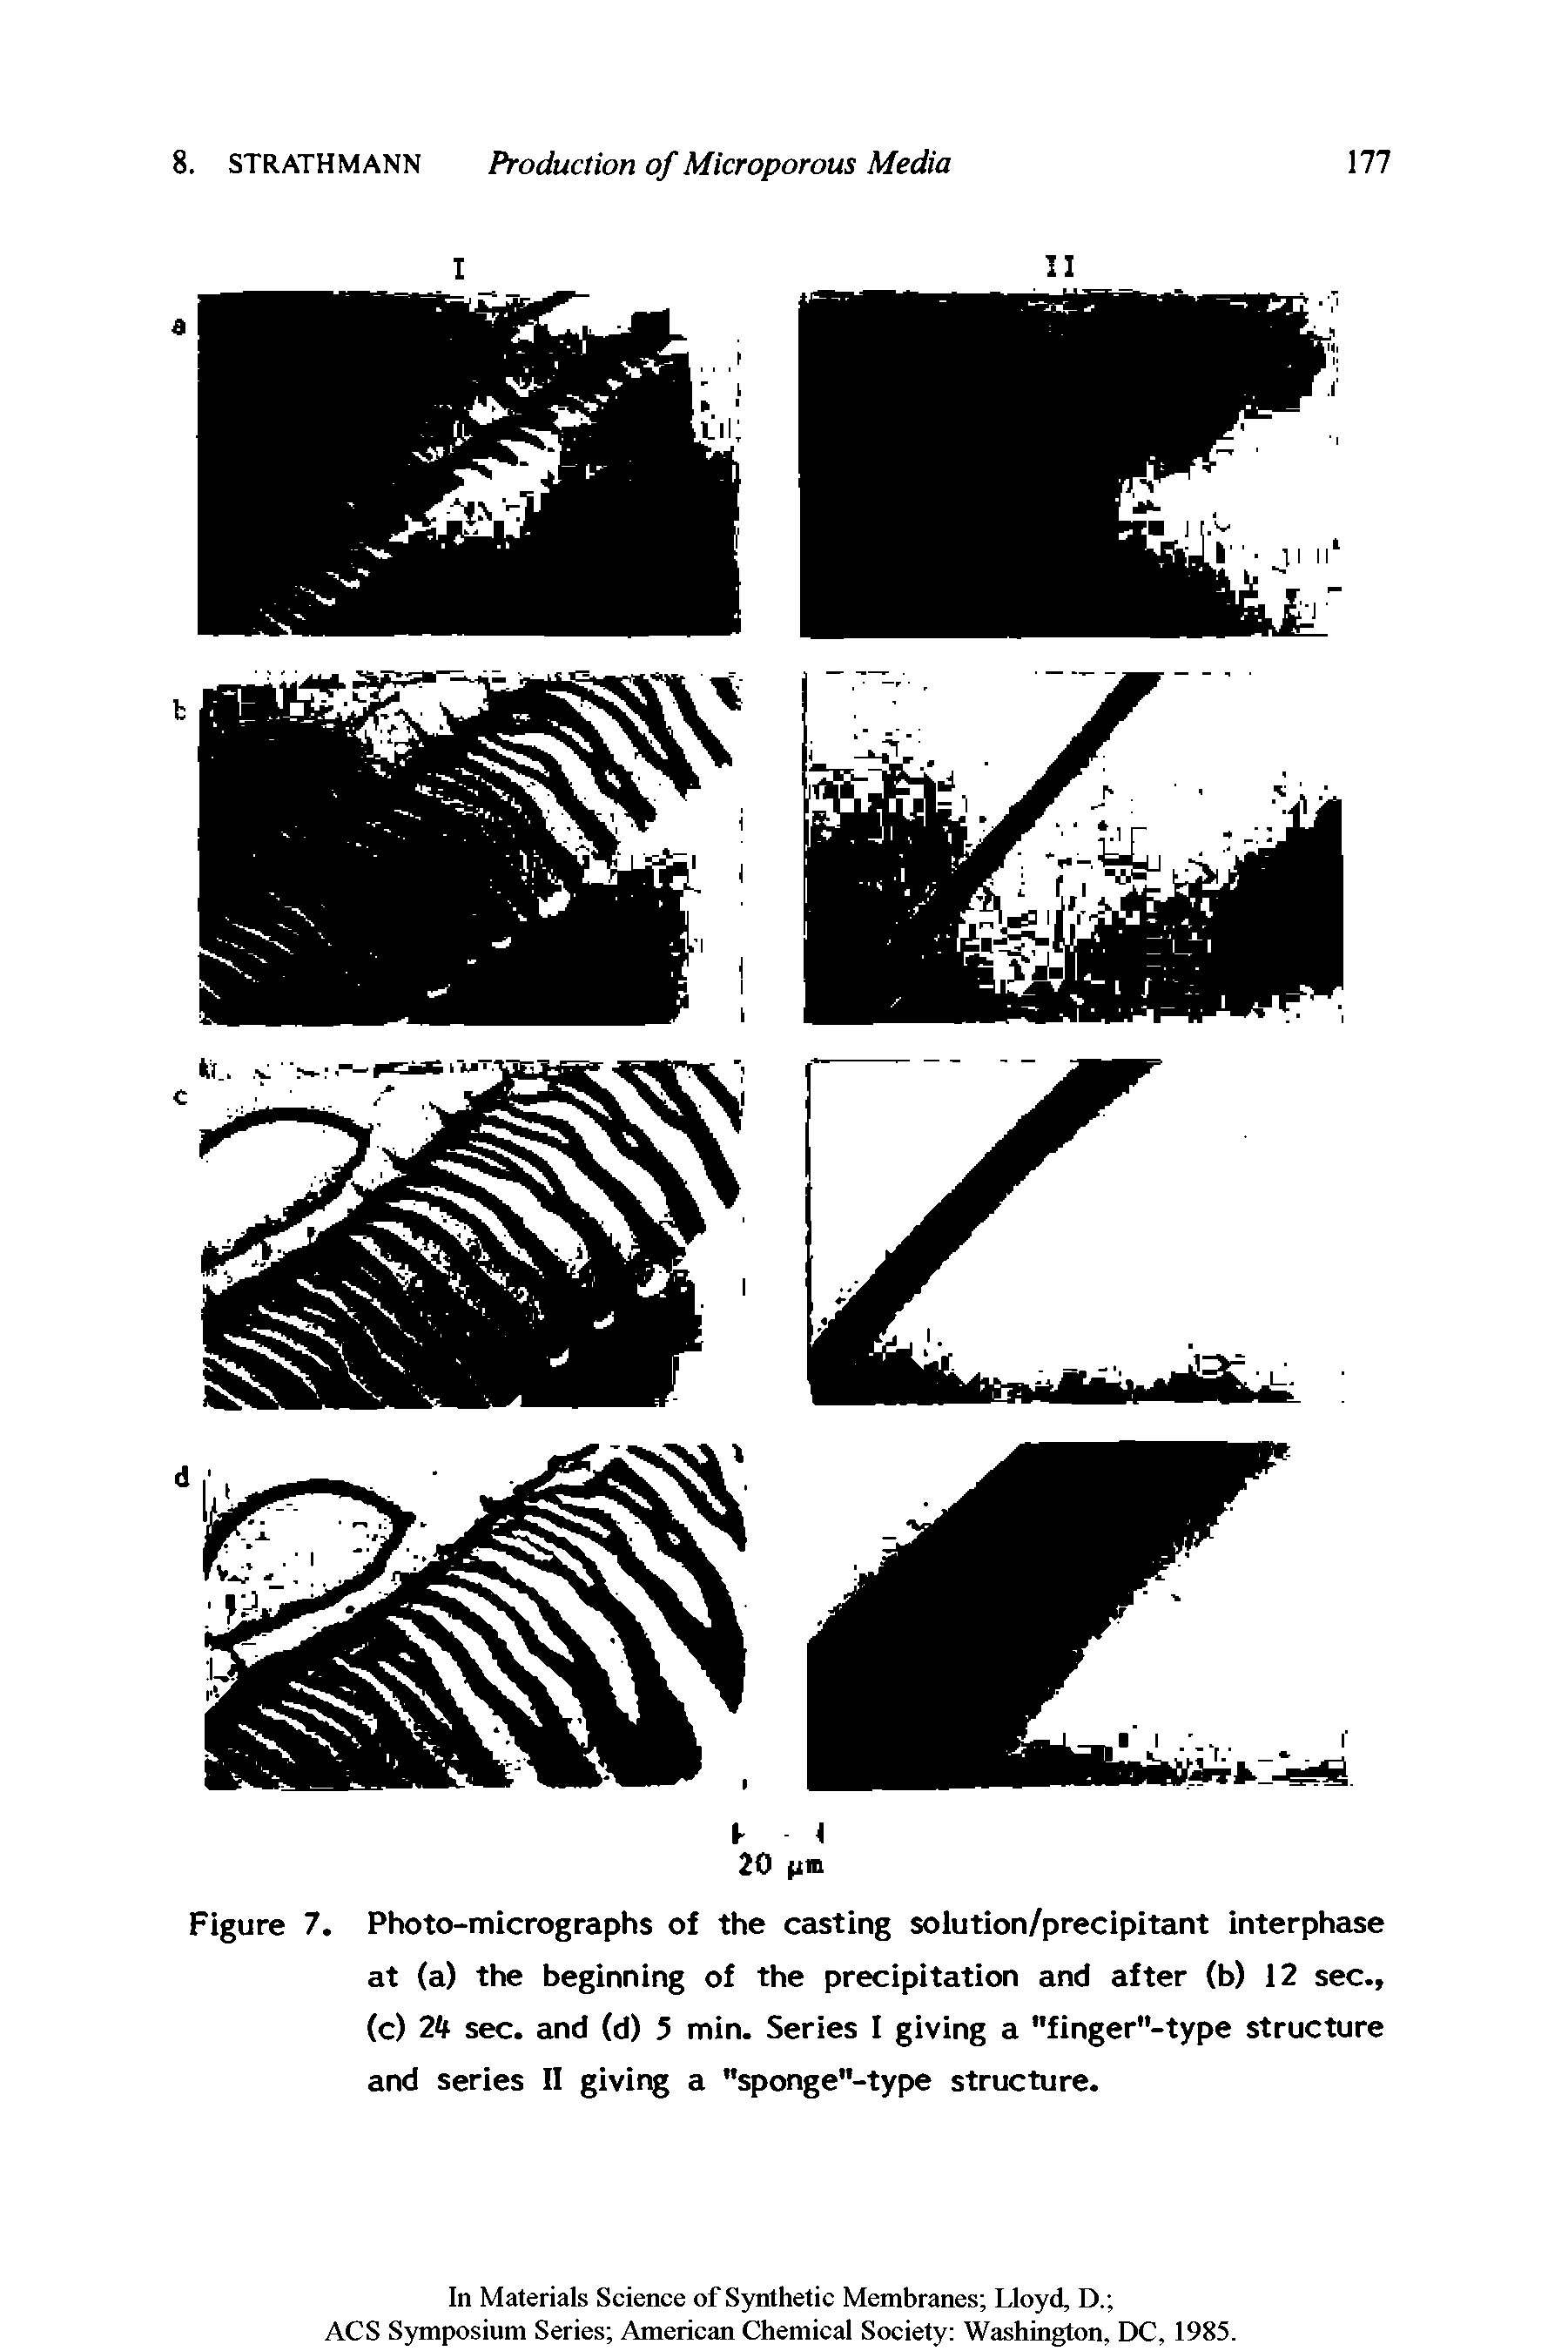 Figure 7. Photo-micrographs of the casting solution/precipitant interphase at (a) the beginning of the precipitation and after (b) 12 sec., (c) 2 f sec. and (d) 5 min. Series I giving a "finger"-type structure and series II giving a "sponge"-type structure.